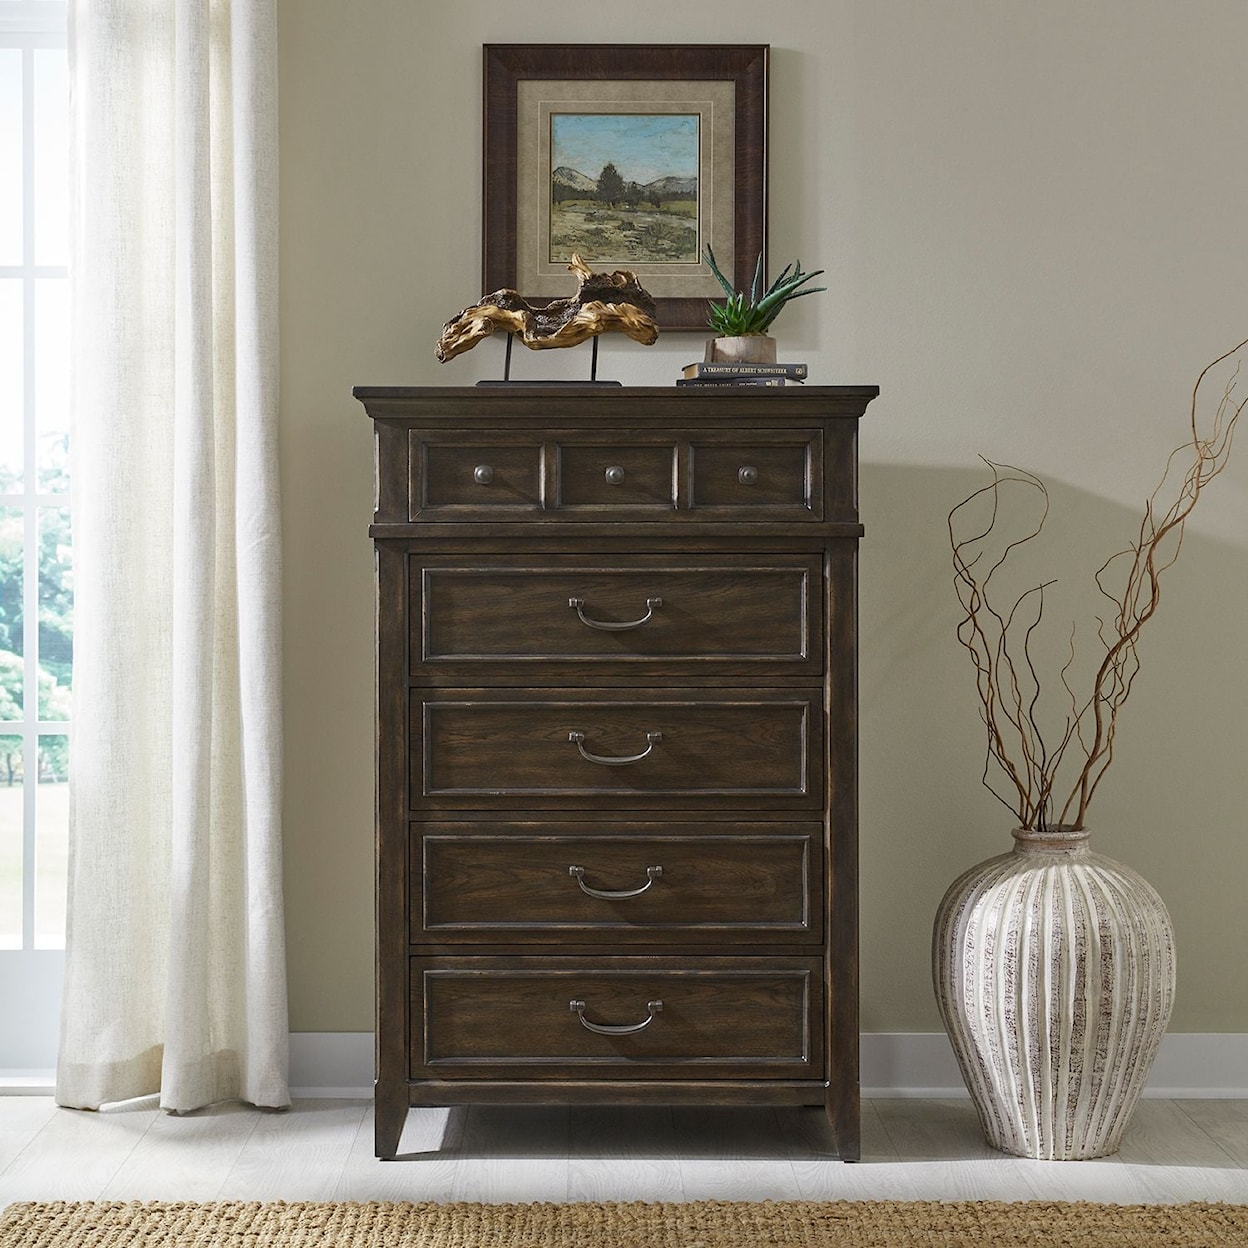 Libby Paradise Valley 5-Drawer Bedroom Chest